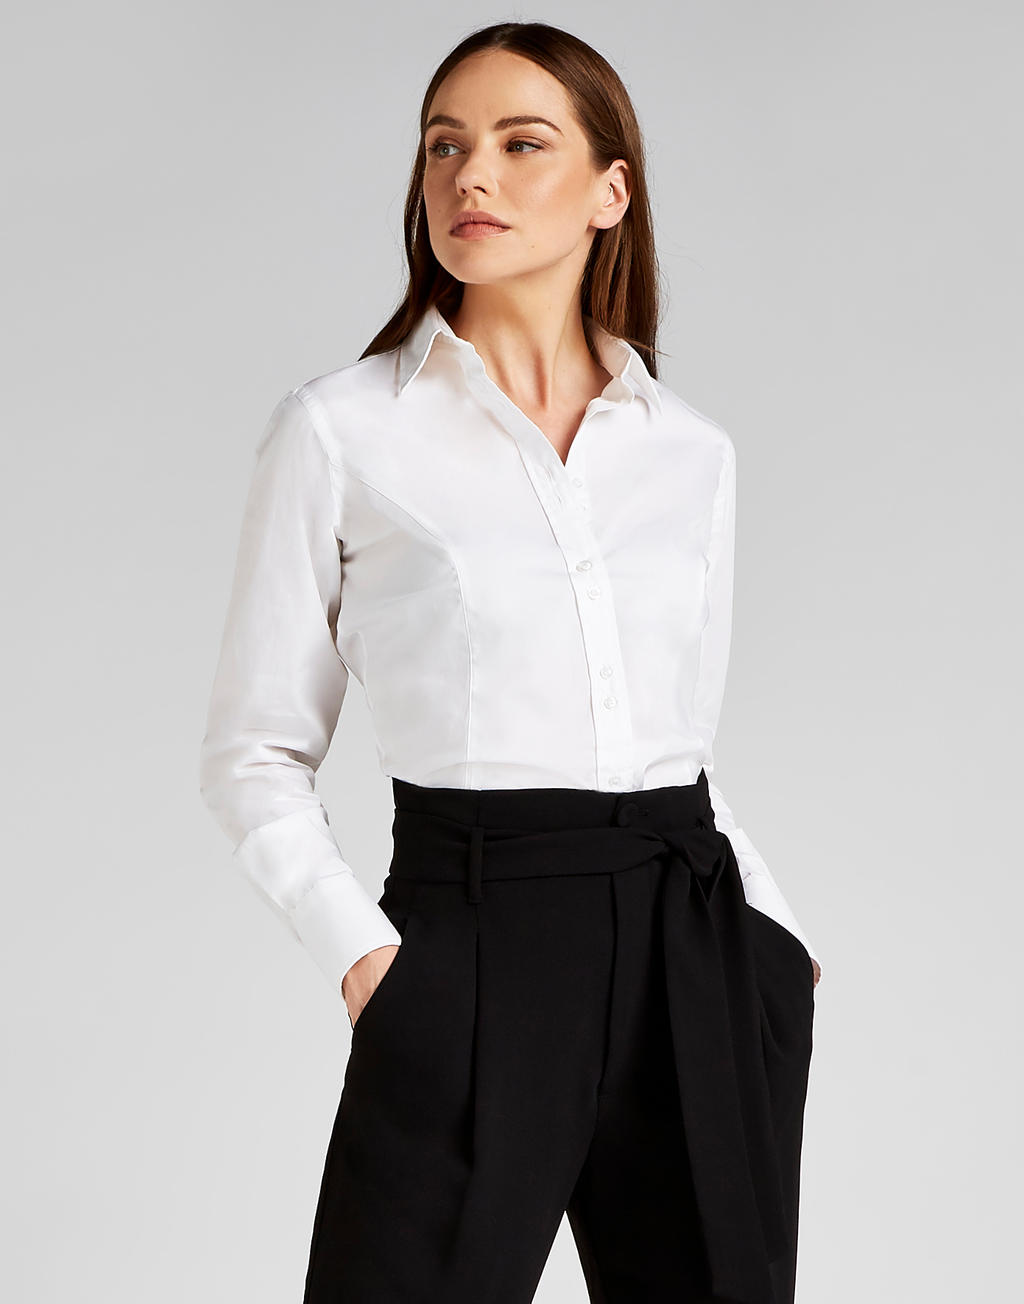  Womens Tailored Fit City Shirt in Farbe White